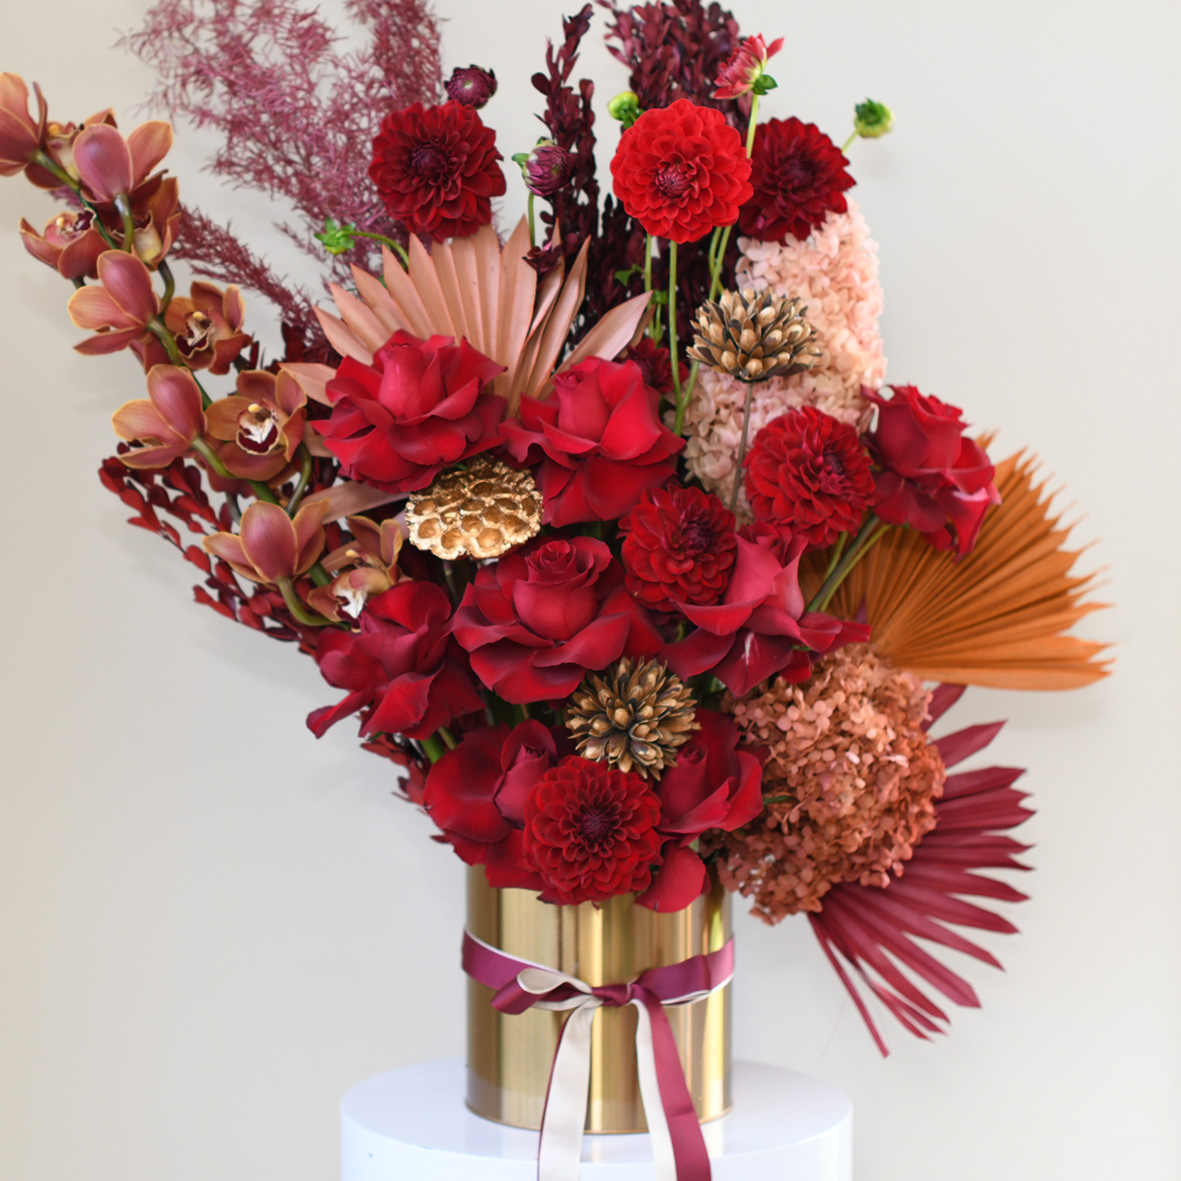 Statement Flowers Sydney Delivery for Events